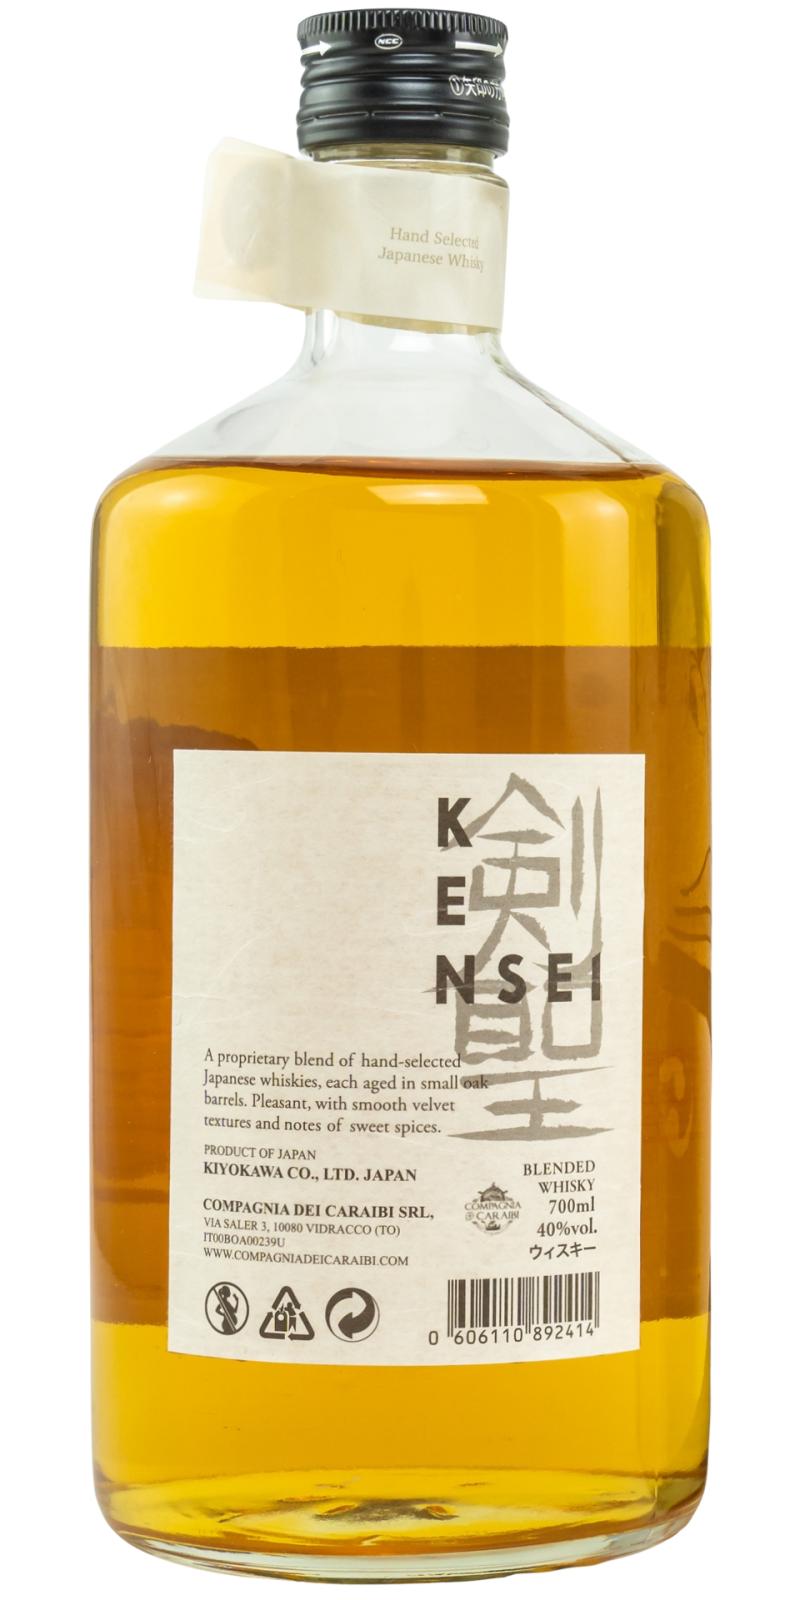 Kensei Japanese Whisky - Ratings and reviews - Whiskybase